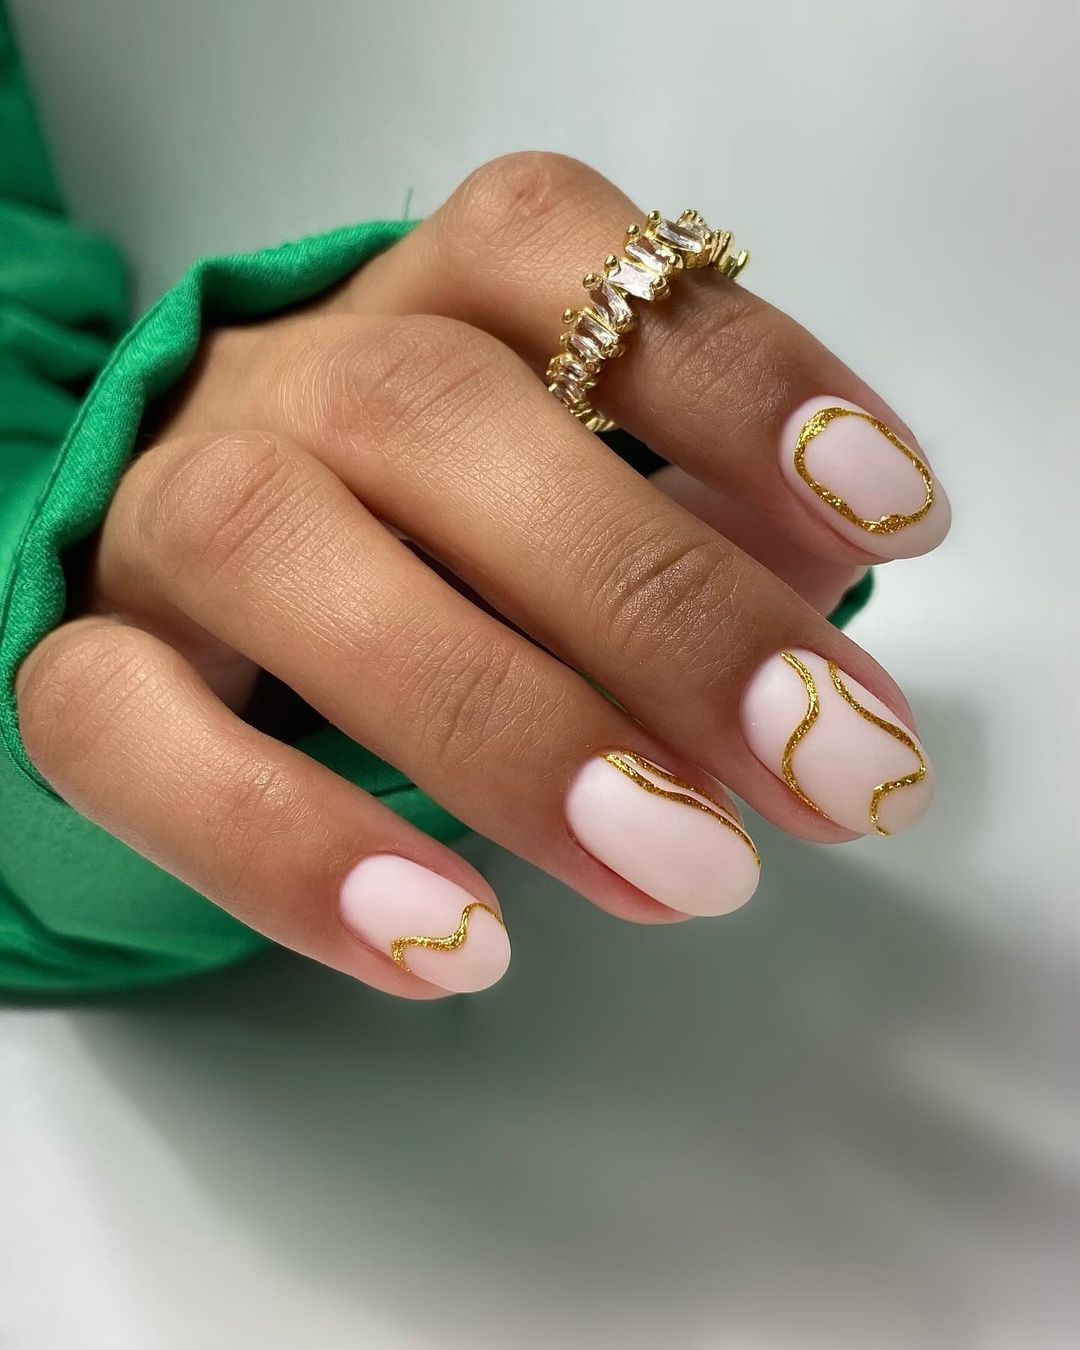 25 Must-Try Summer Nail Trends for Your Next Manicure Adventure